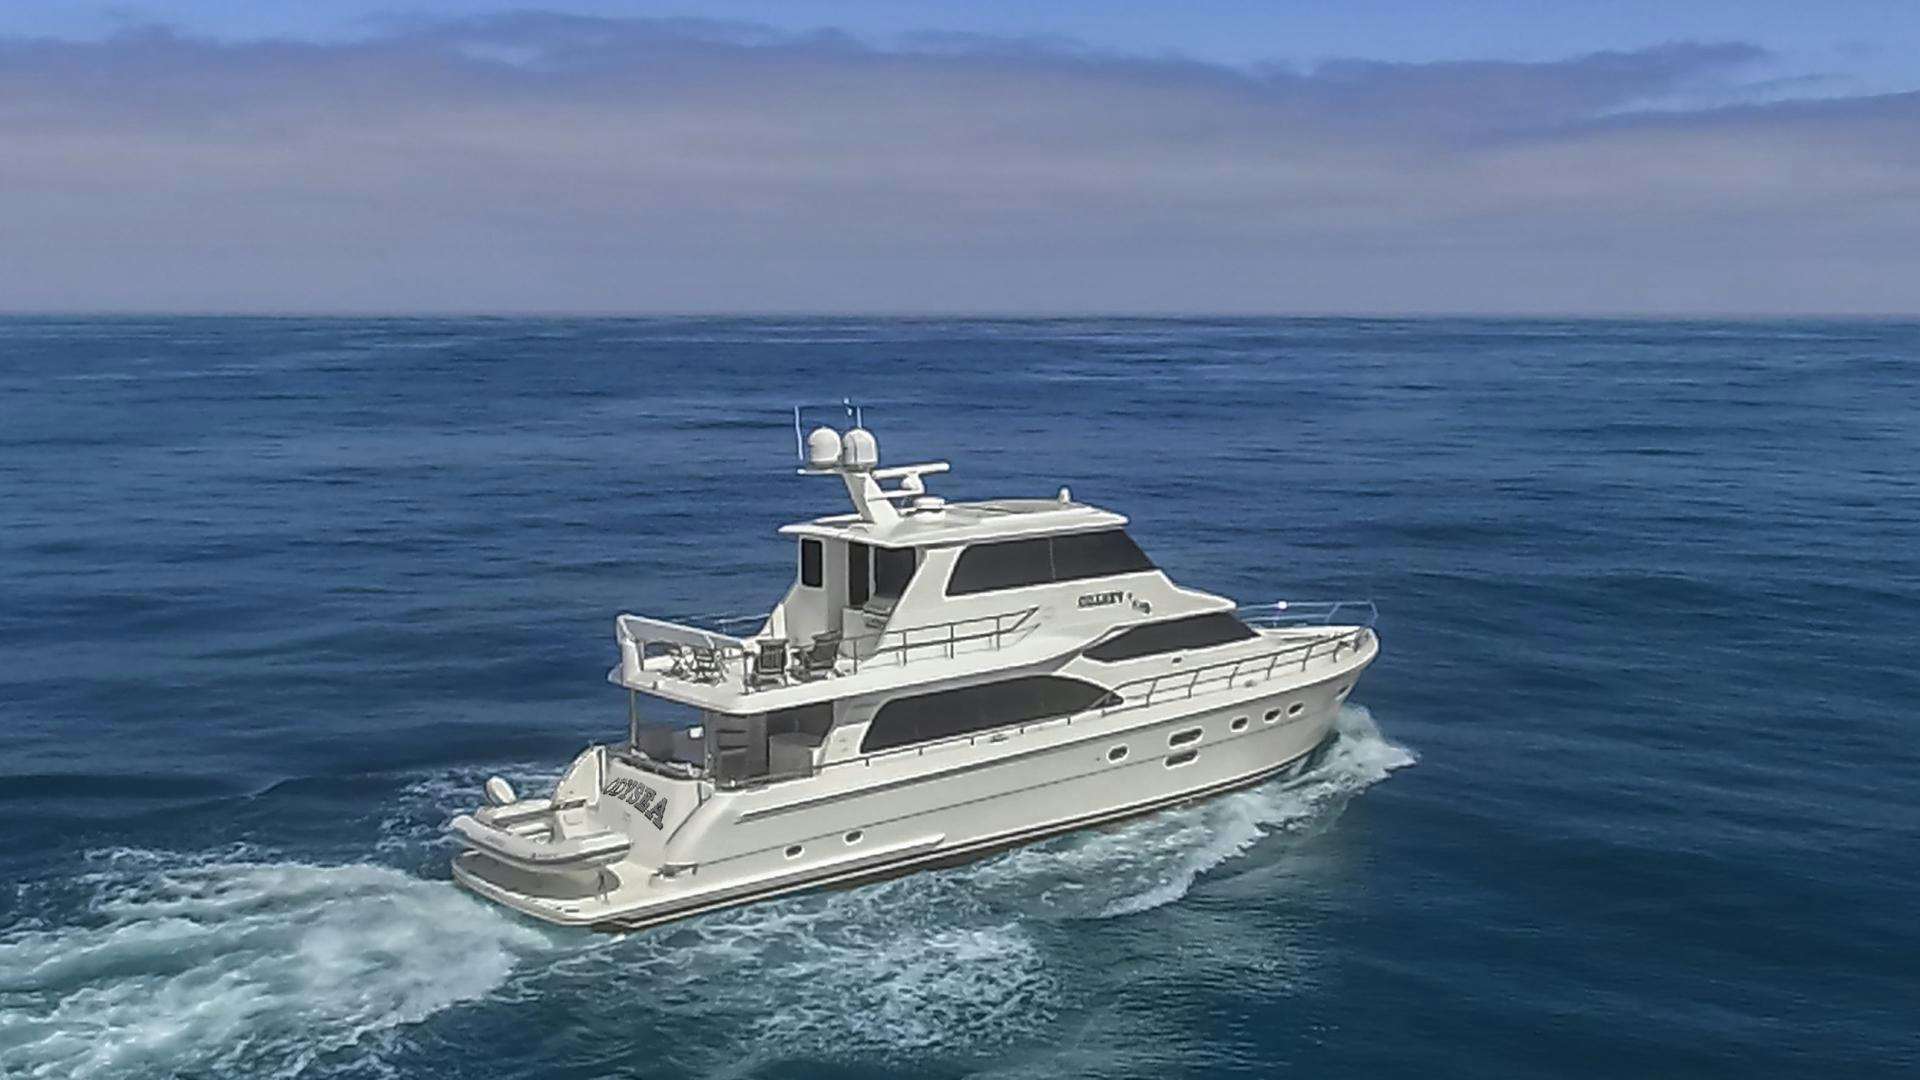 Watch Video for ODYSEA Yacht for Sale